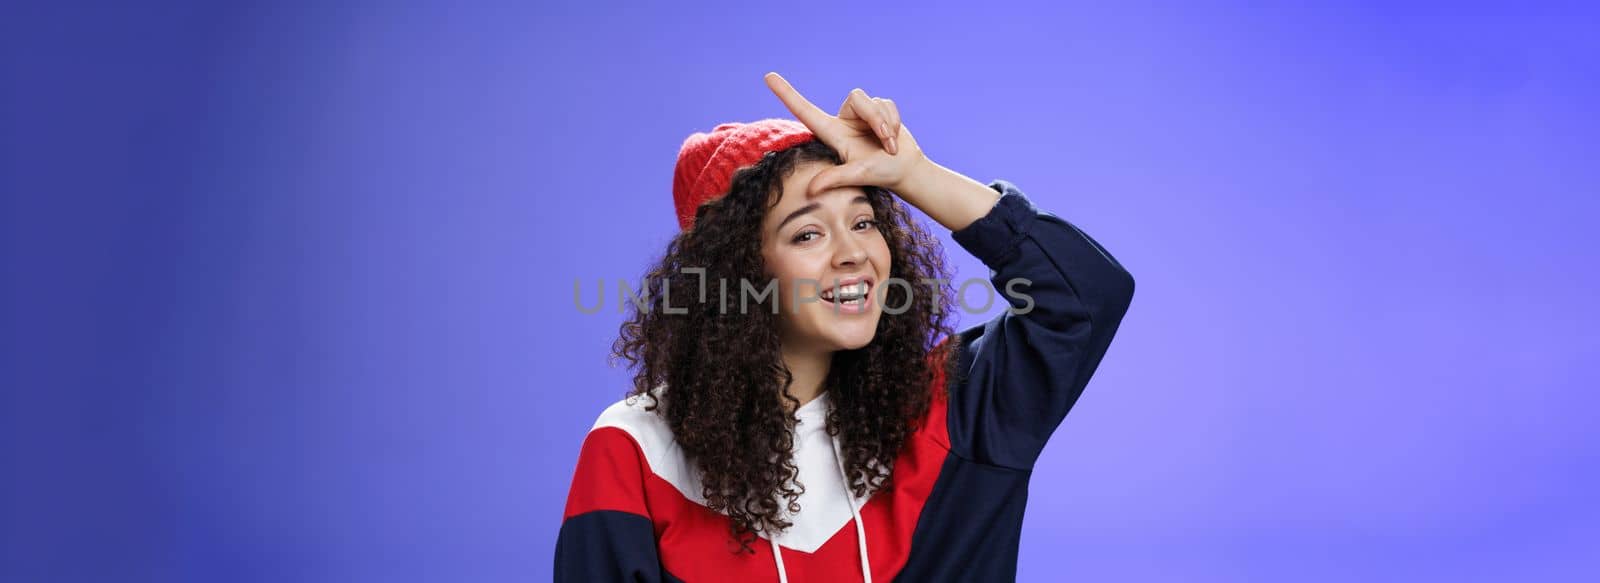 Girl triumphing and mocking friend as winning showing loser gesture on forehead and laughing having fun standing pleased and happy over blue background, smiling at camera joyfully by Benzoix